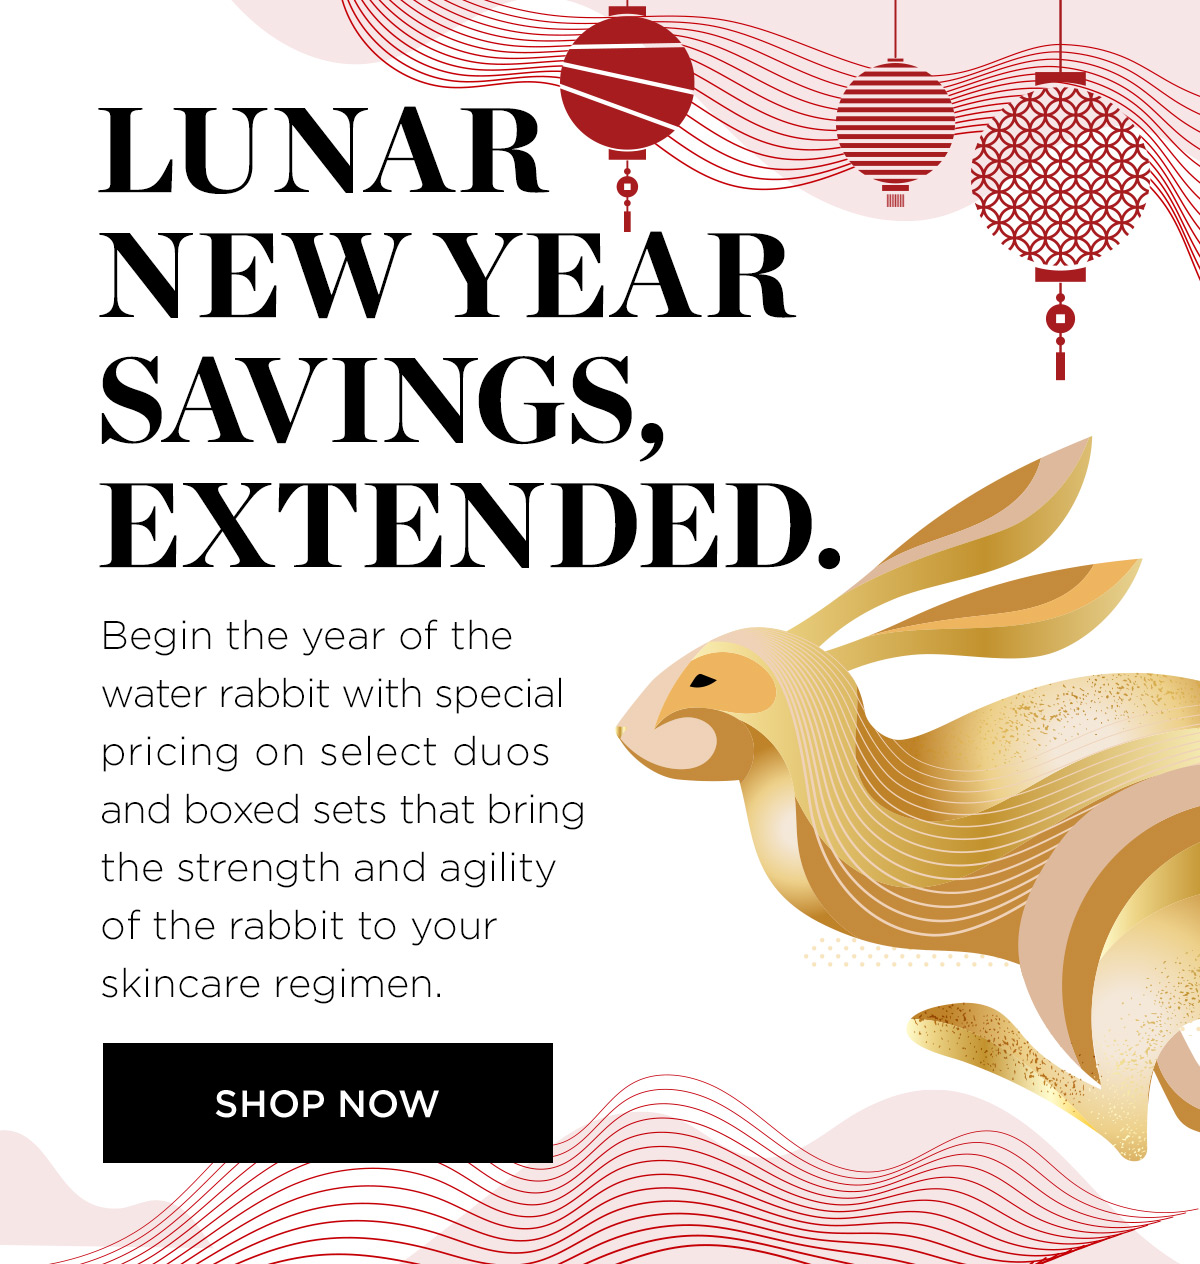 LN AR N NEW YEAR oy SAVINGS, EXTENDED. Begin the year of the water rabbit with special pricing on select duos and boxed sets that bring the strength and agility of the rabbit to your skincare regimen. 